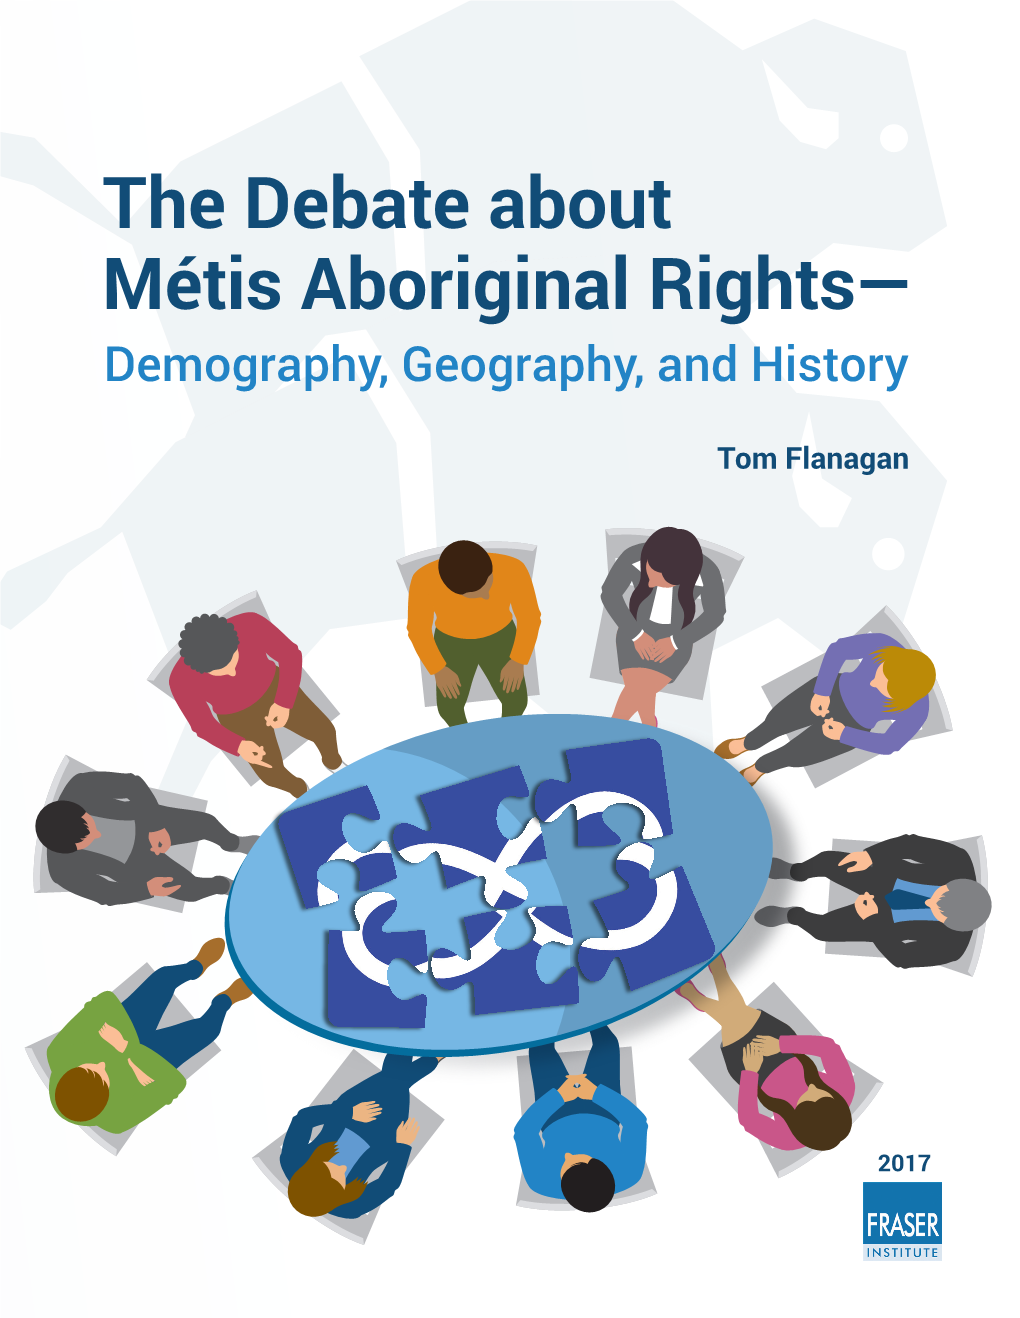 The Debate About Métis Aboriginal Rights—Demography, Geography, and History